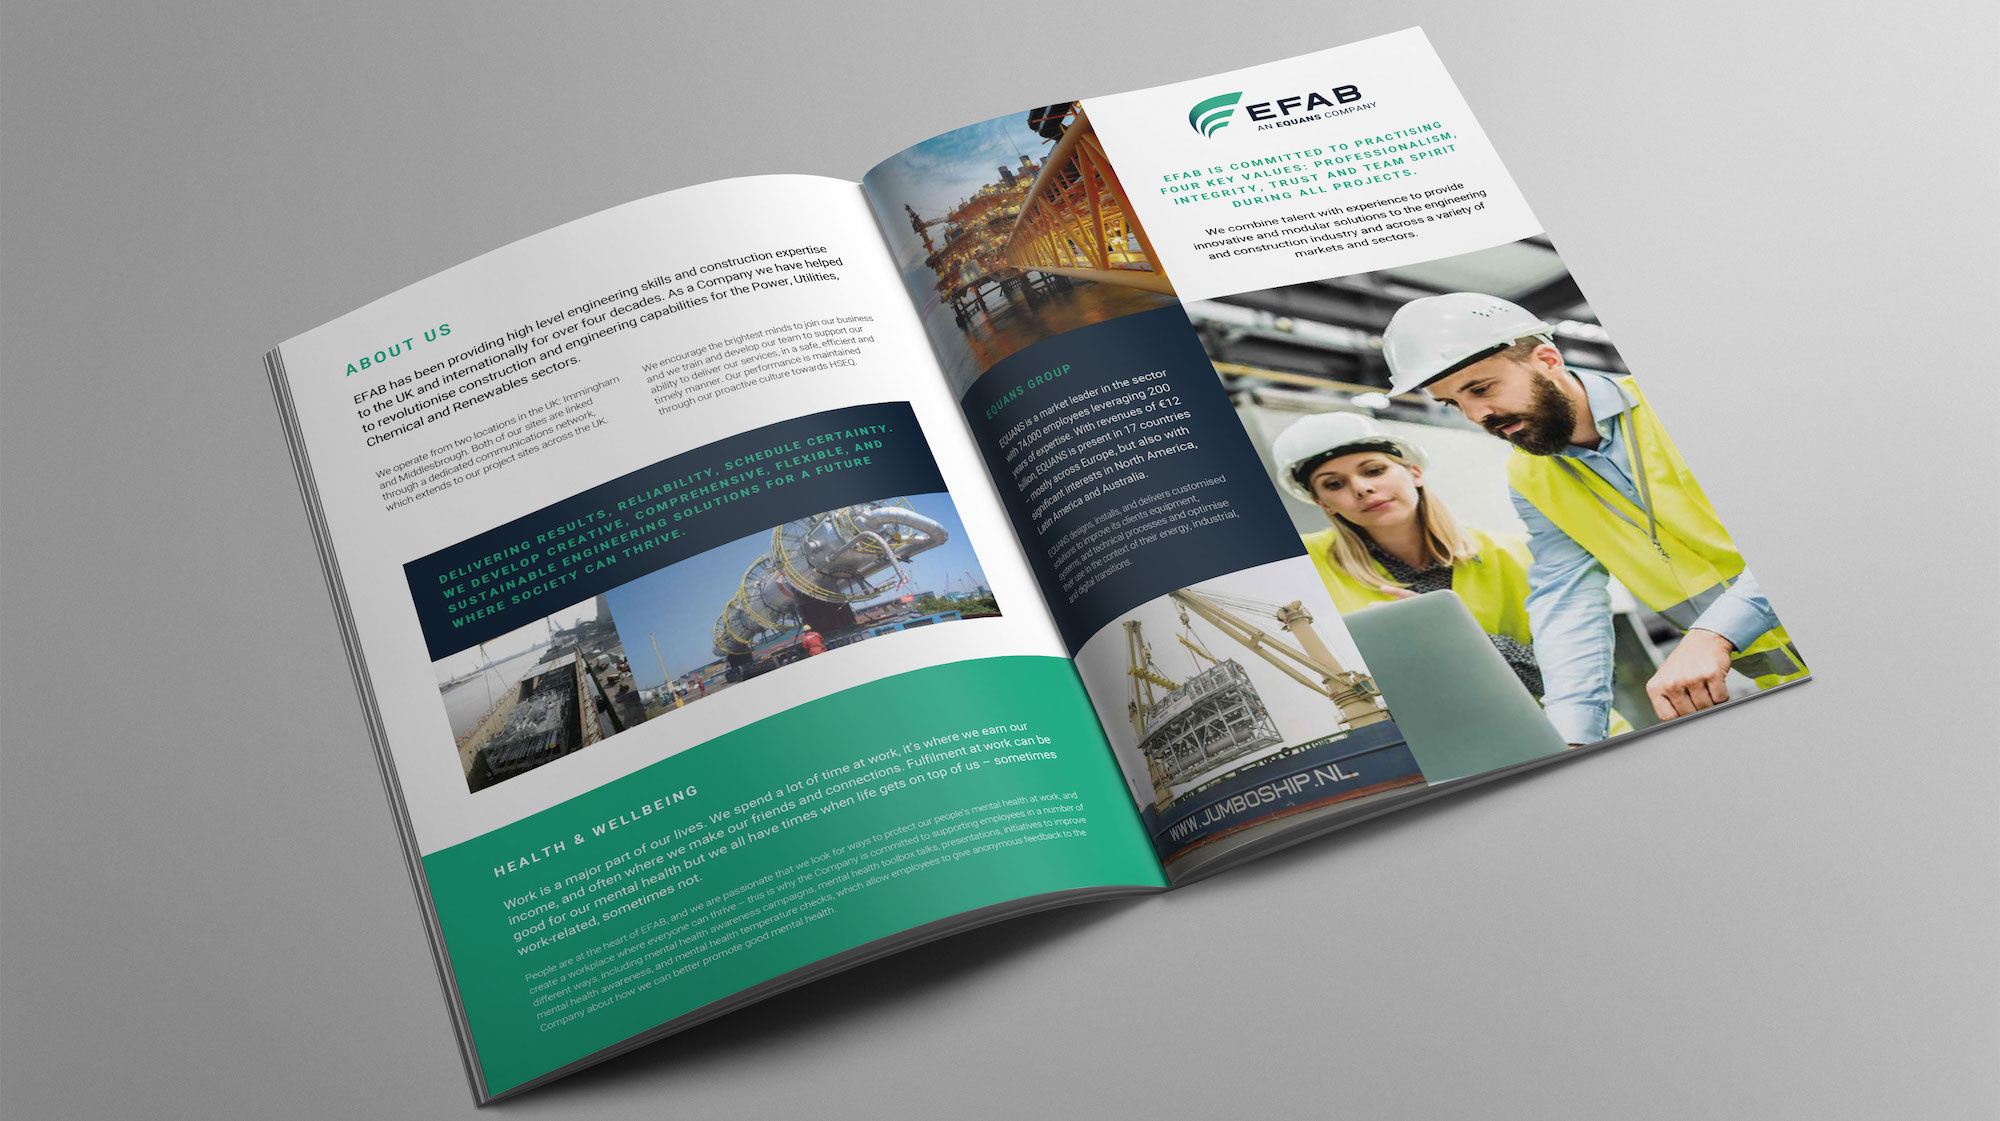 A brochure showcasing the EFAB construction company's expertise and services.